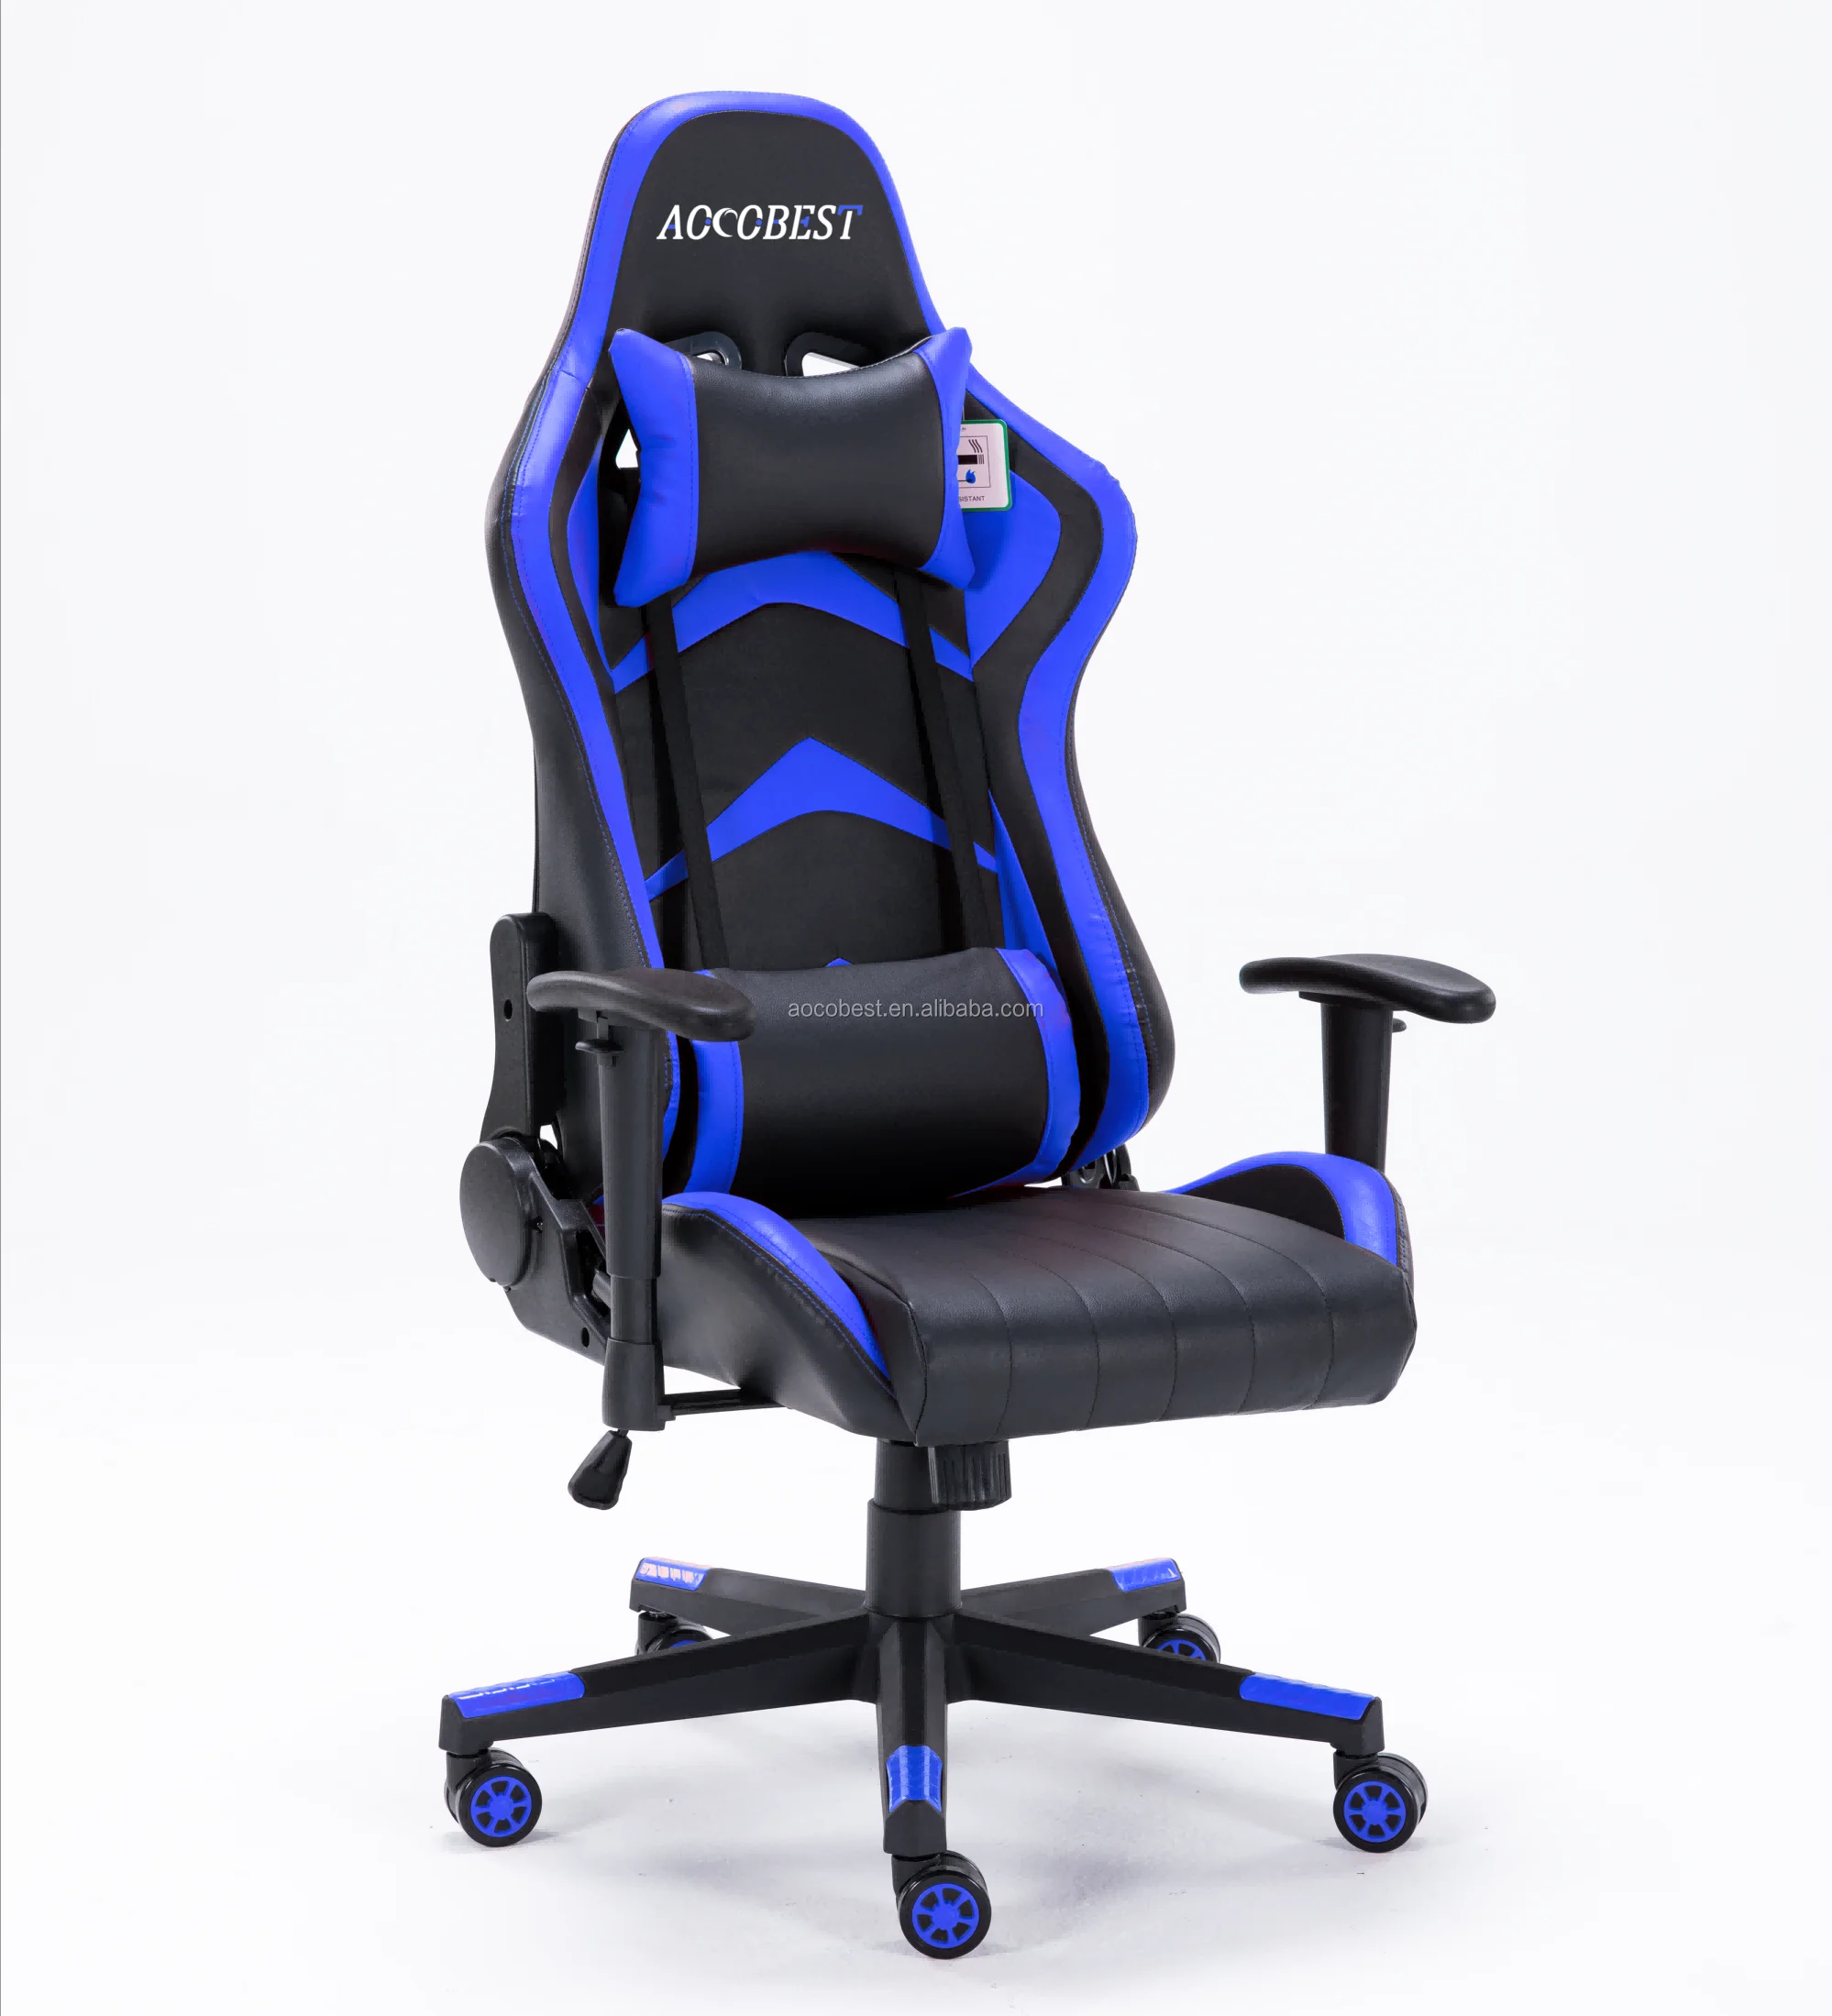 Lie Down Low Price Comfortable Blue Silla Gamer Reclining Computer Footrest Gaming Pc Chair Scorpion Buy Silla Gaming Scorpion Gaming Chair Silla Gamer Product On Alibaba Com